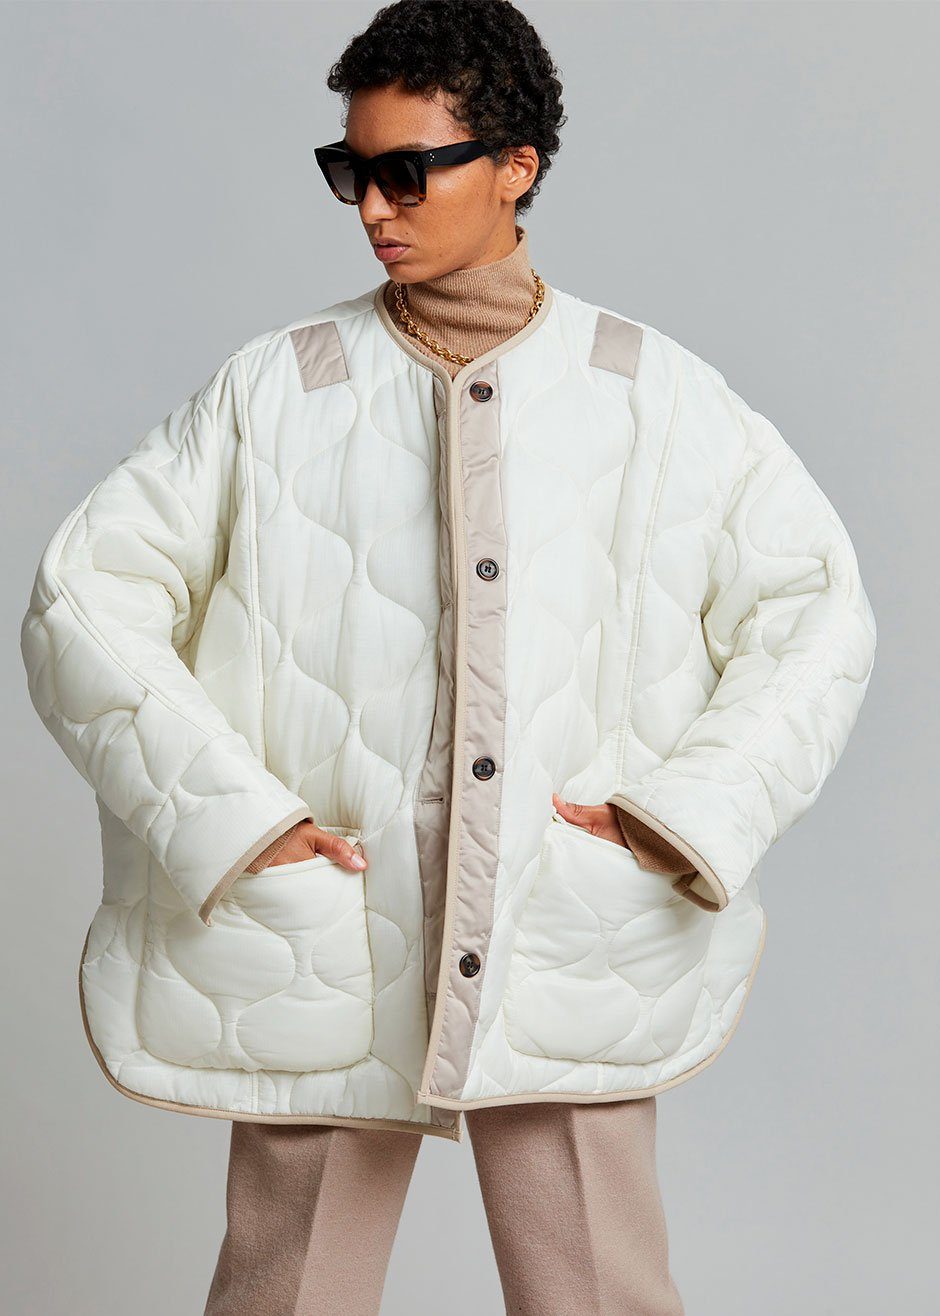 The Frankie Shop TEDDY QUILTED JACKET XS 【500円引きクーポン ...